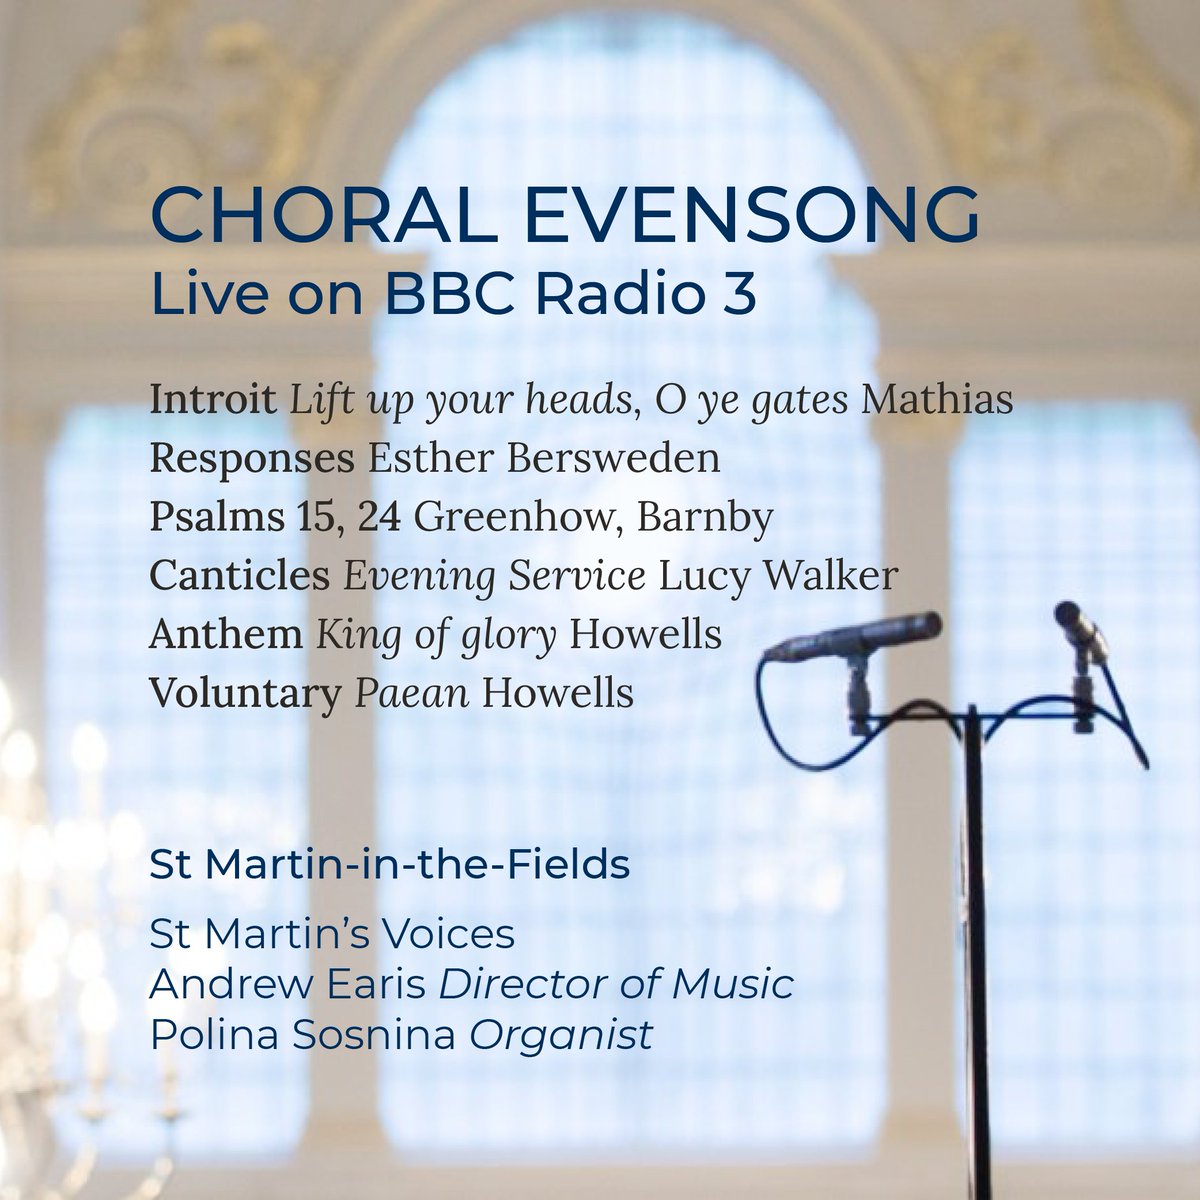 Today's broadcast of Choral Evensong on @BBCRadio3 comes live from @smitf_london 📻 Tune in at 3pm to hear @StMartinsVoices premiering @lucywalkermusic's new Evening Service, plus an anthem and organ voluntary by Howells 🎶